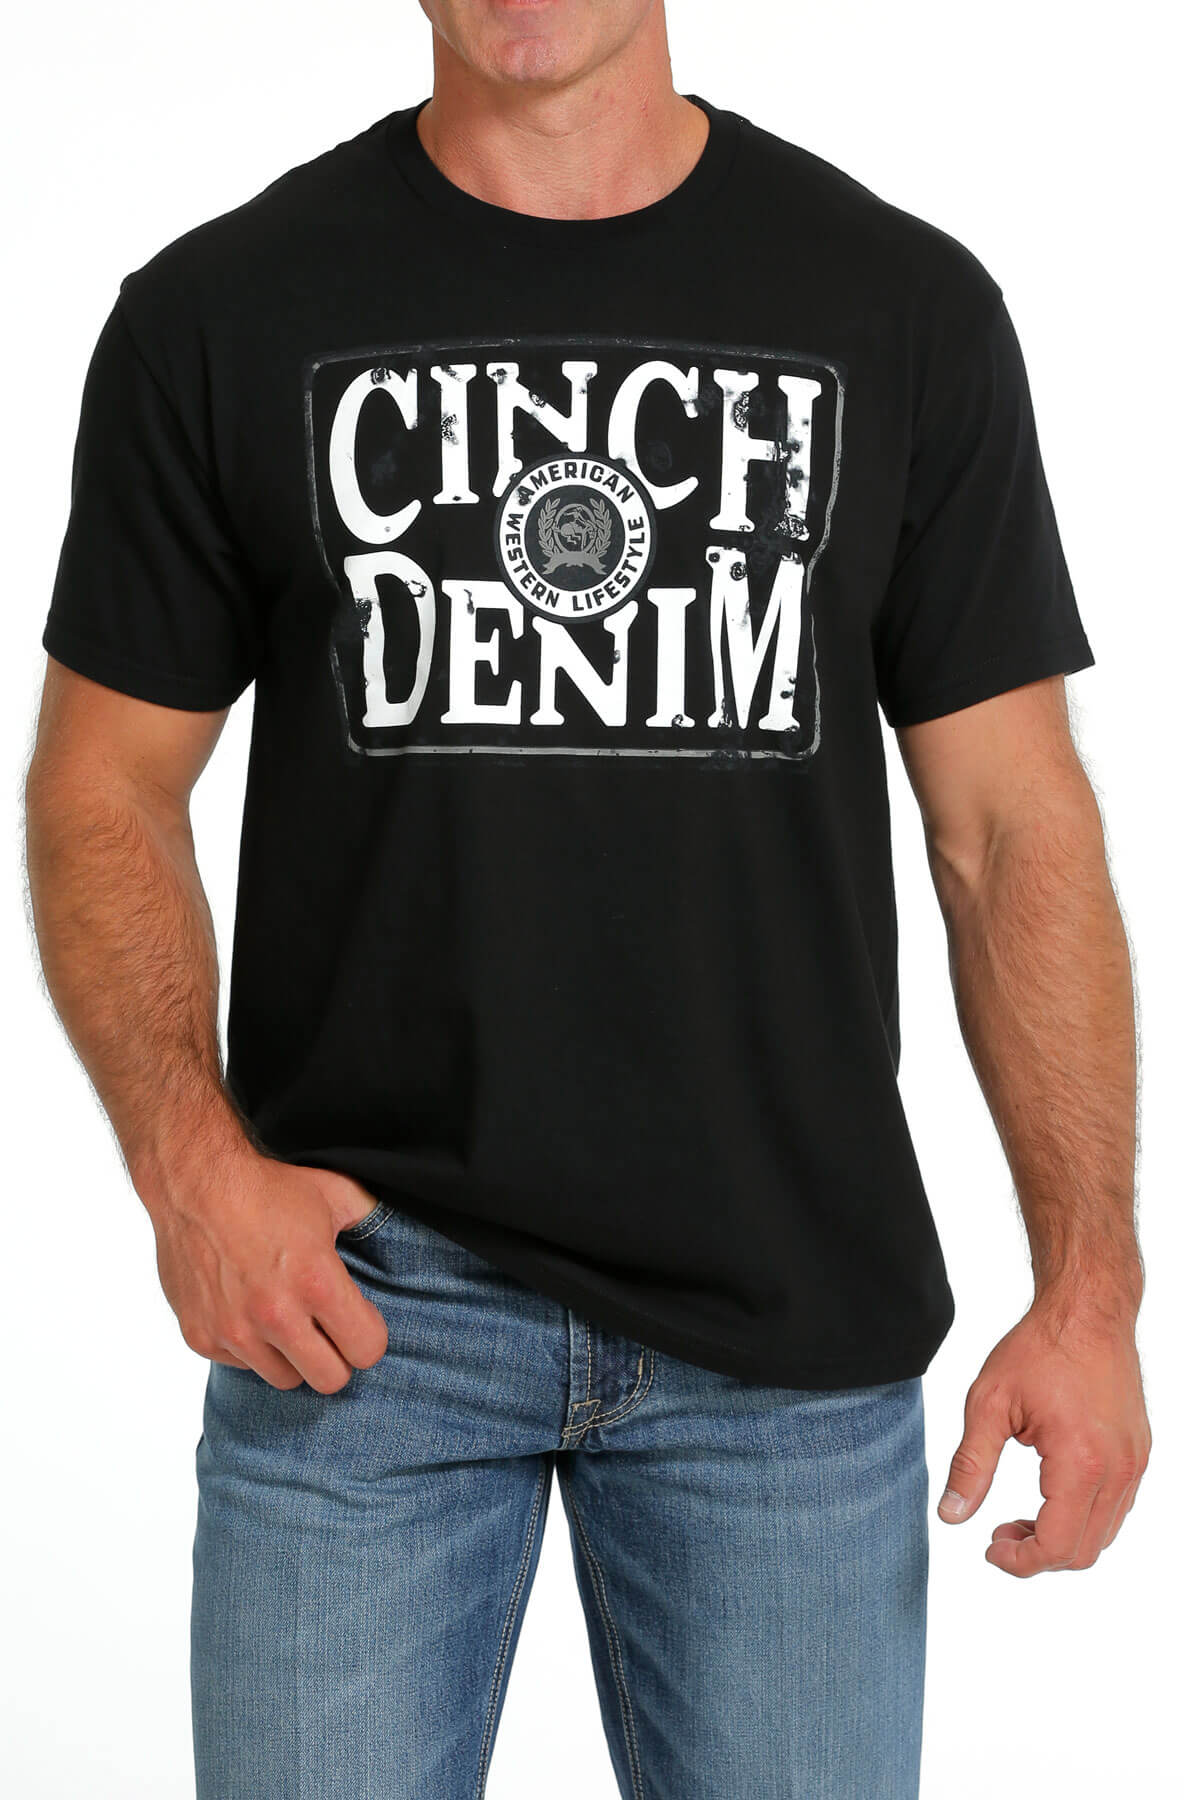 black tee shirt with cinch denim screen printed on the front